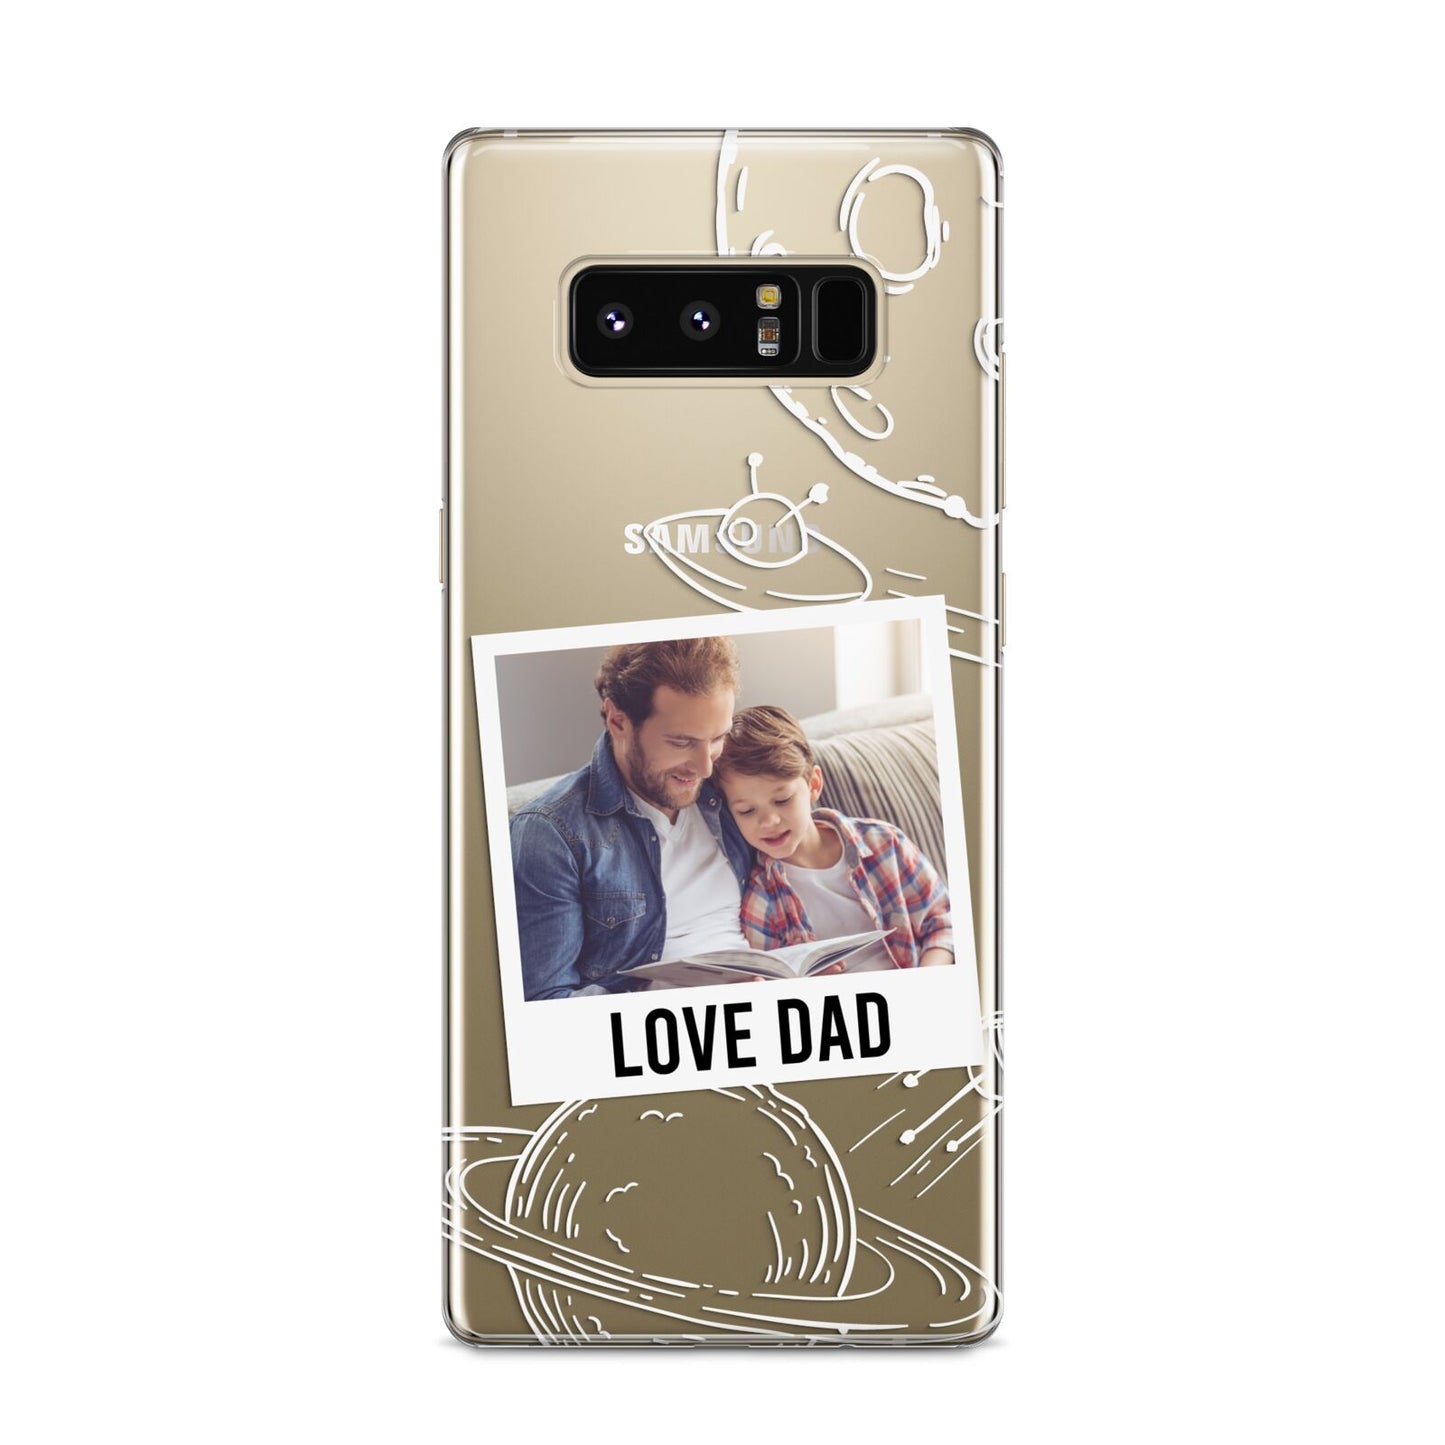 Personalised From Dad Photo Samsung Galaxy S8 Case